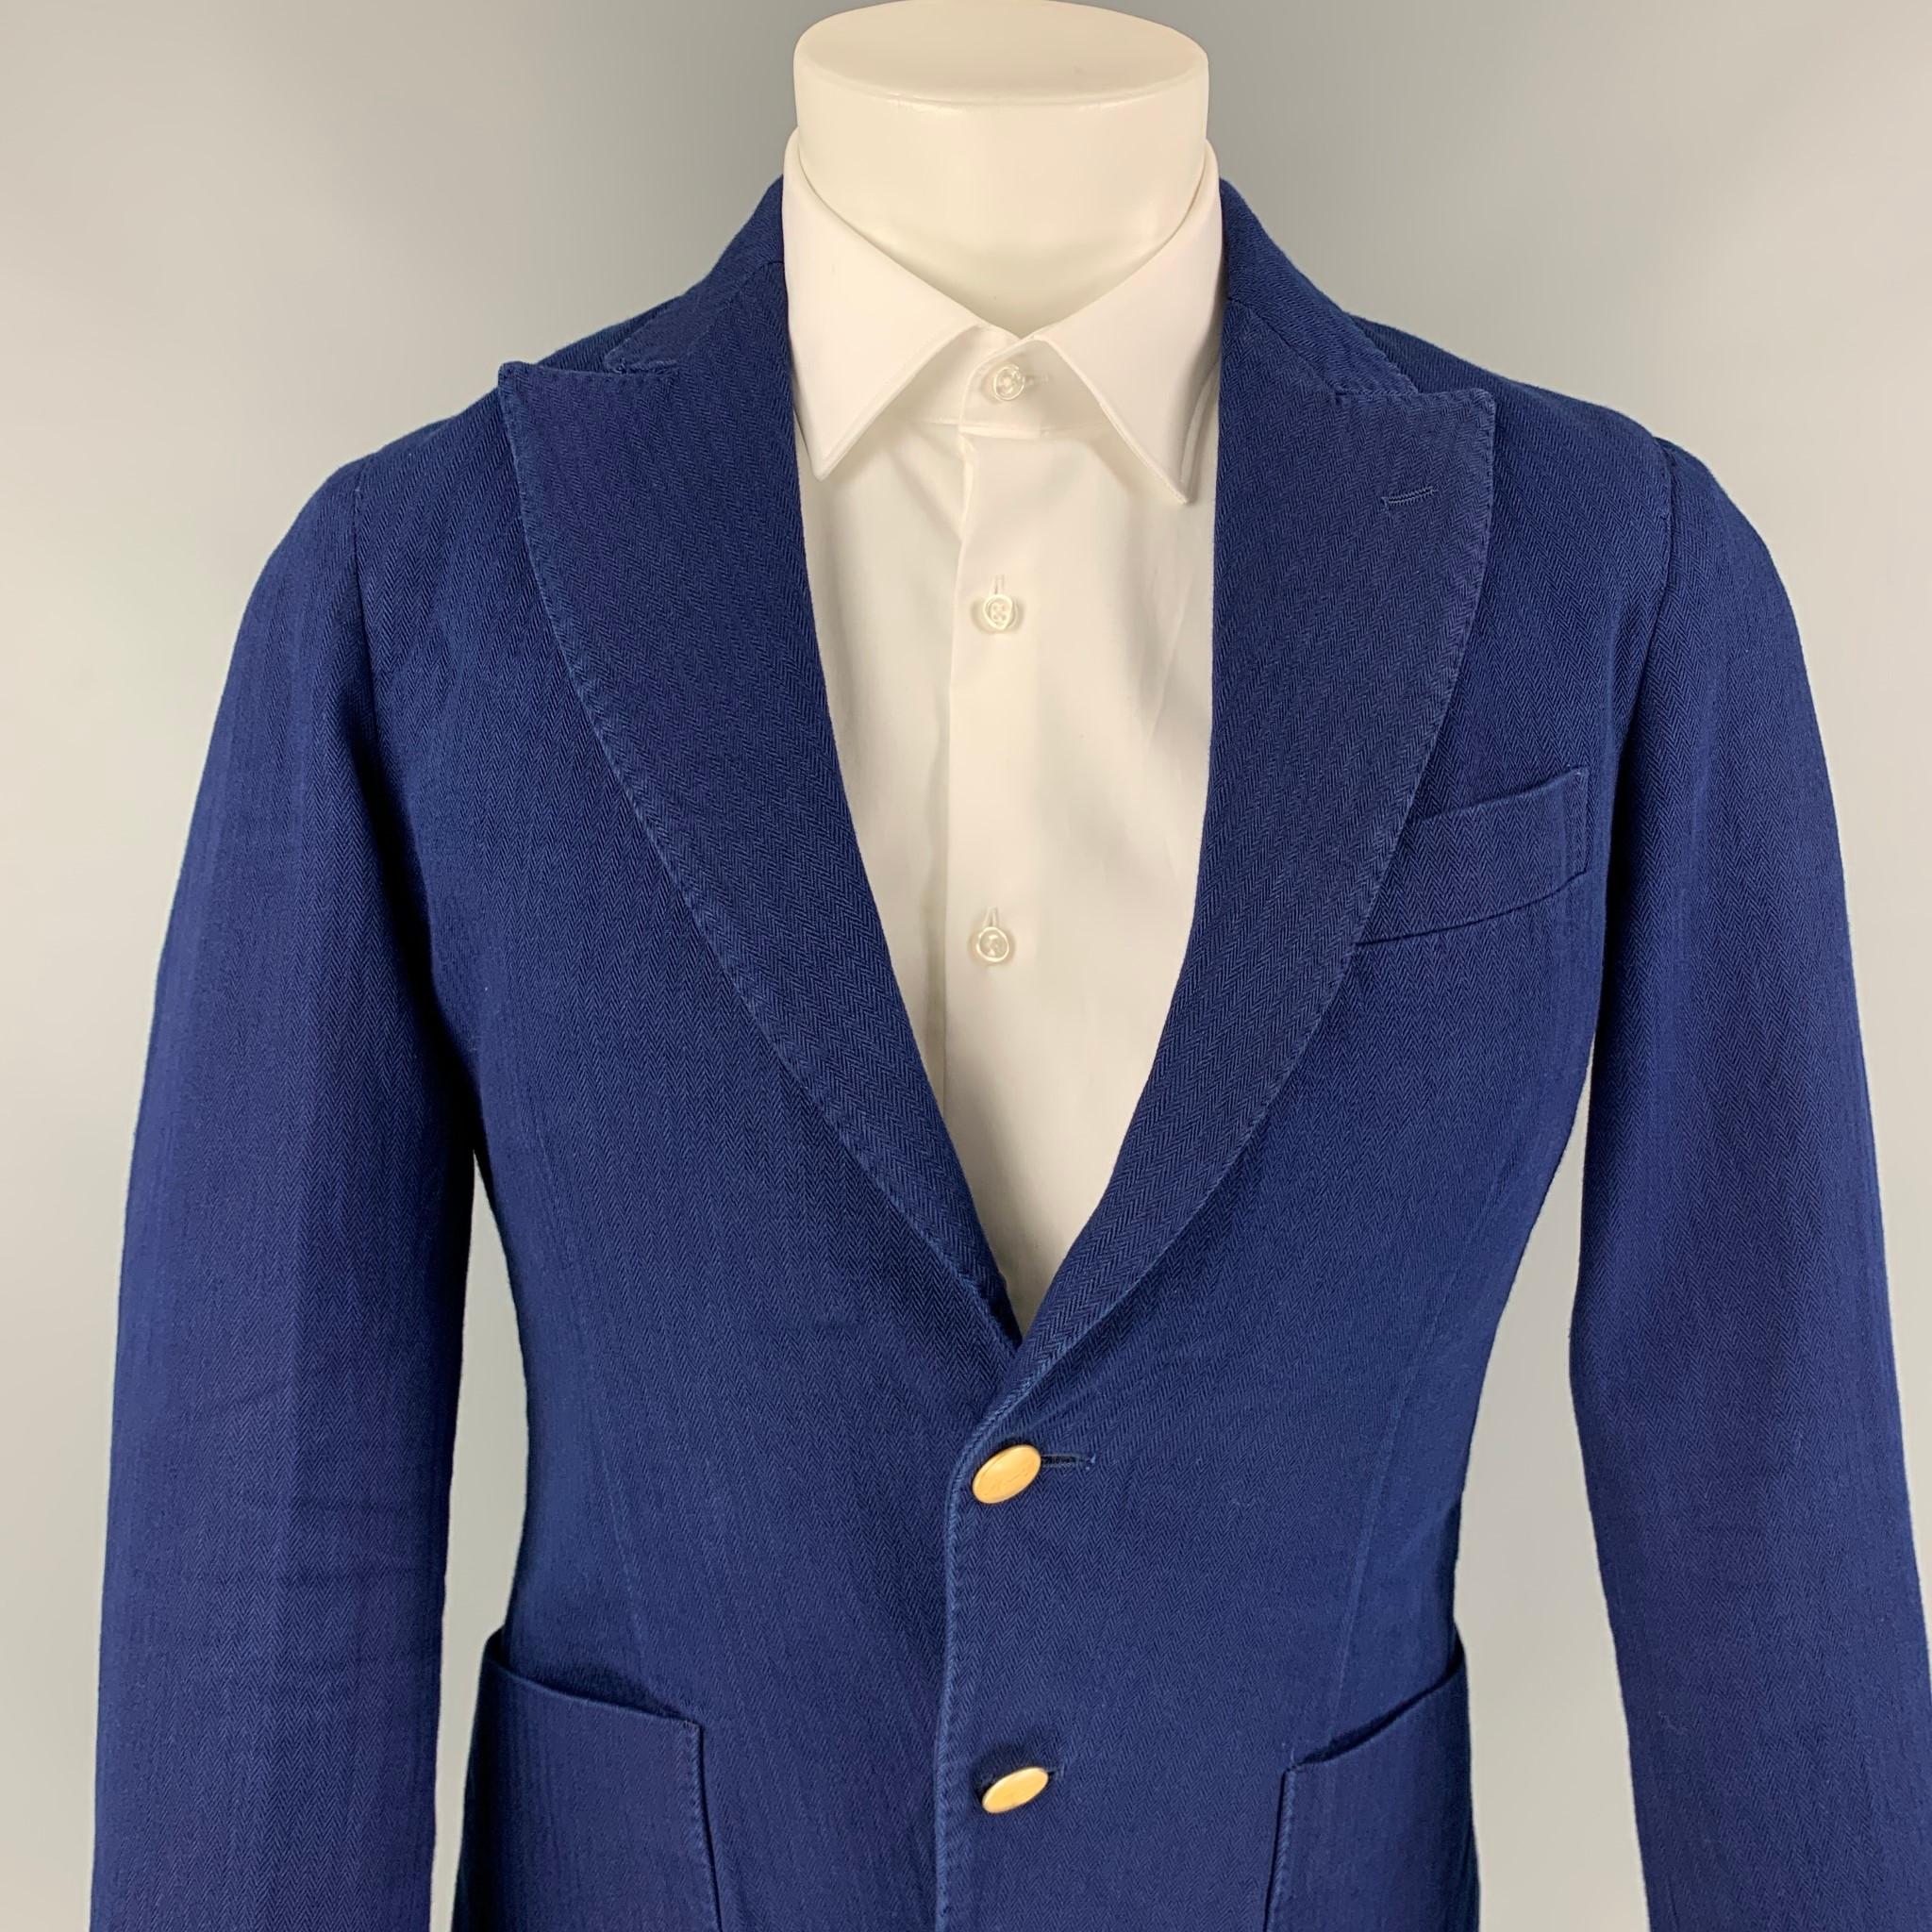 MEMORY'S sport coat comes in a navy cotton with a half liner featuring a peak lapel, double back vent, patch pockets, and a double gold tone button closure. Made in Italy. 

Very Good Pre-Owned Condition.
Marked: 46

Measurements:

Shoulder: 16